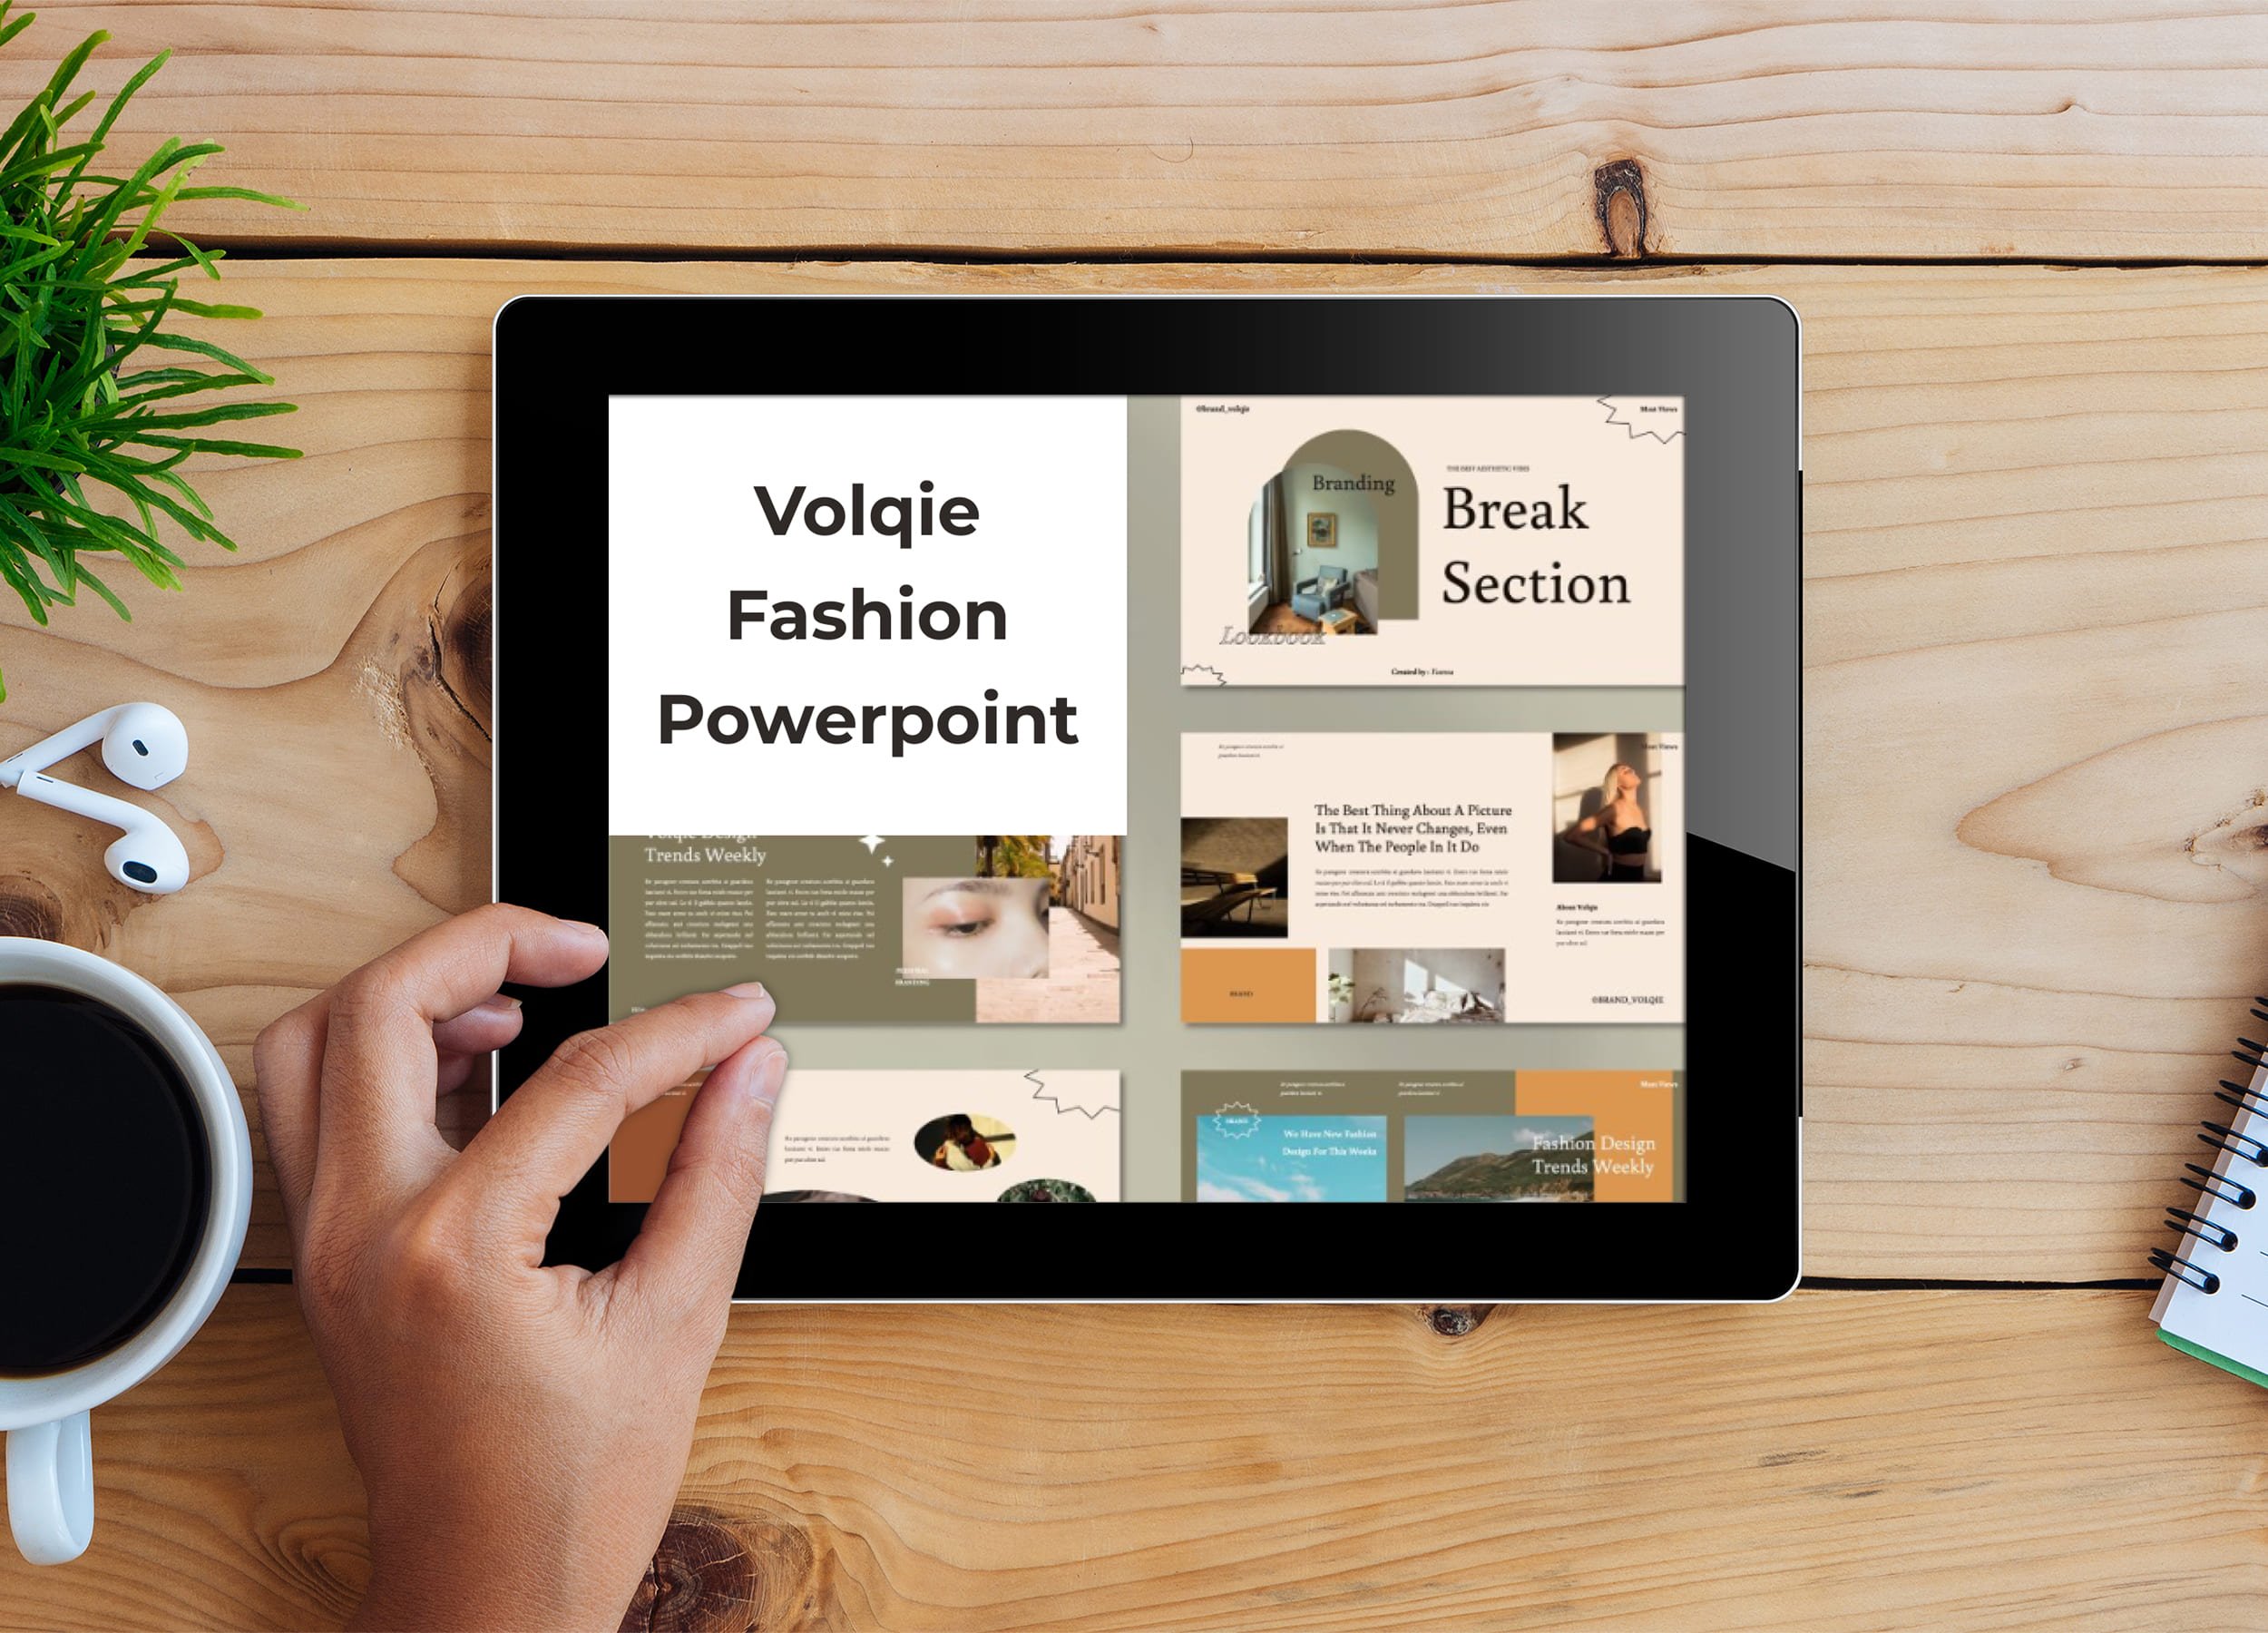 Tablet option of the Volqie - Fashion Powerpoint.